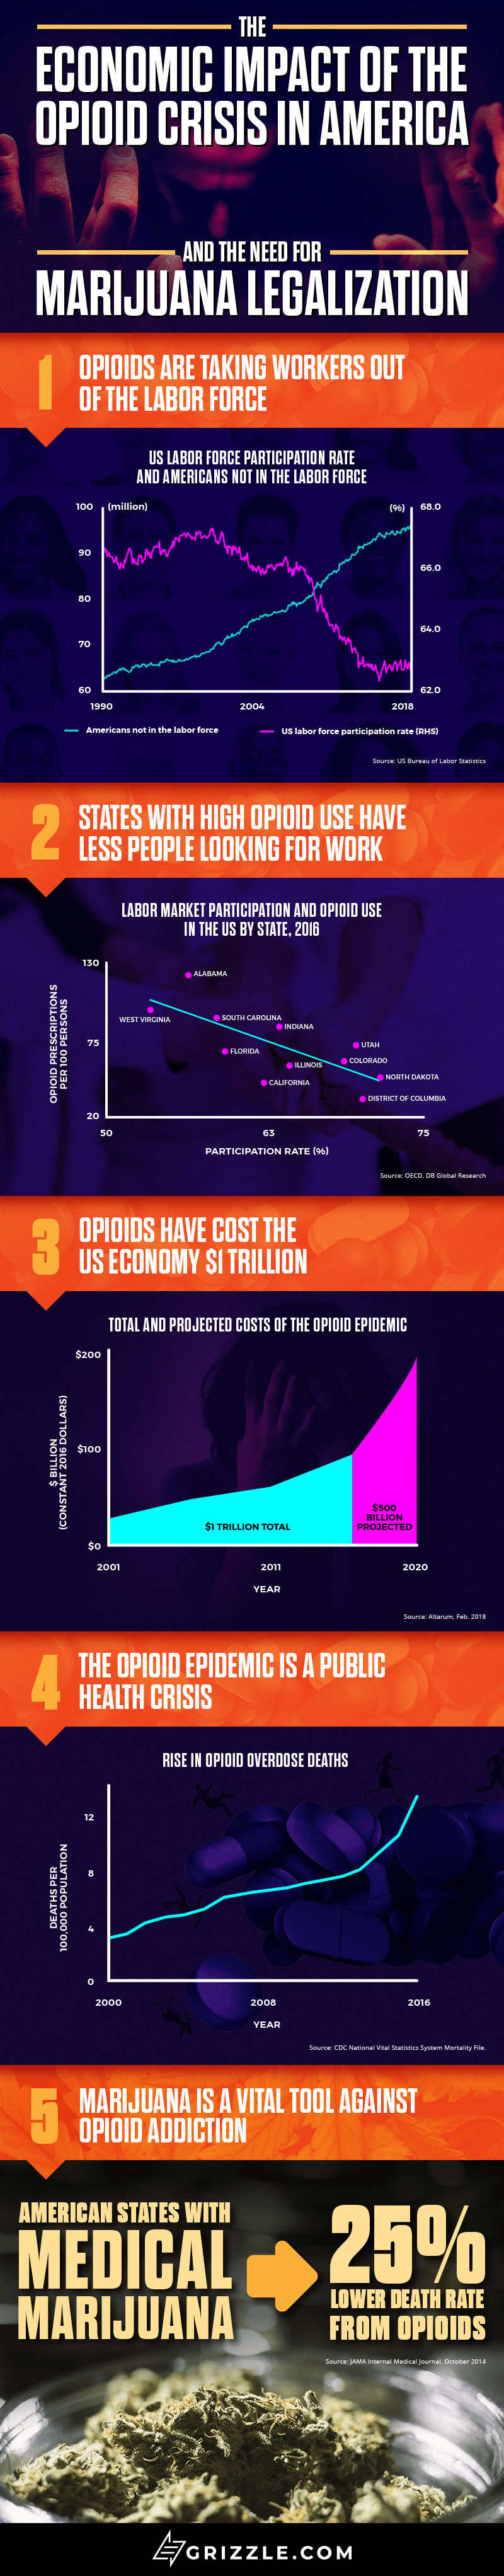 cannabis legalization and the opioid epidemic - infographic